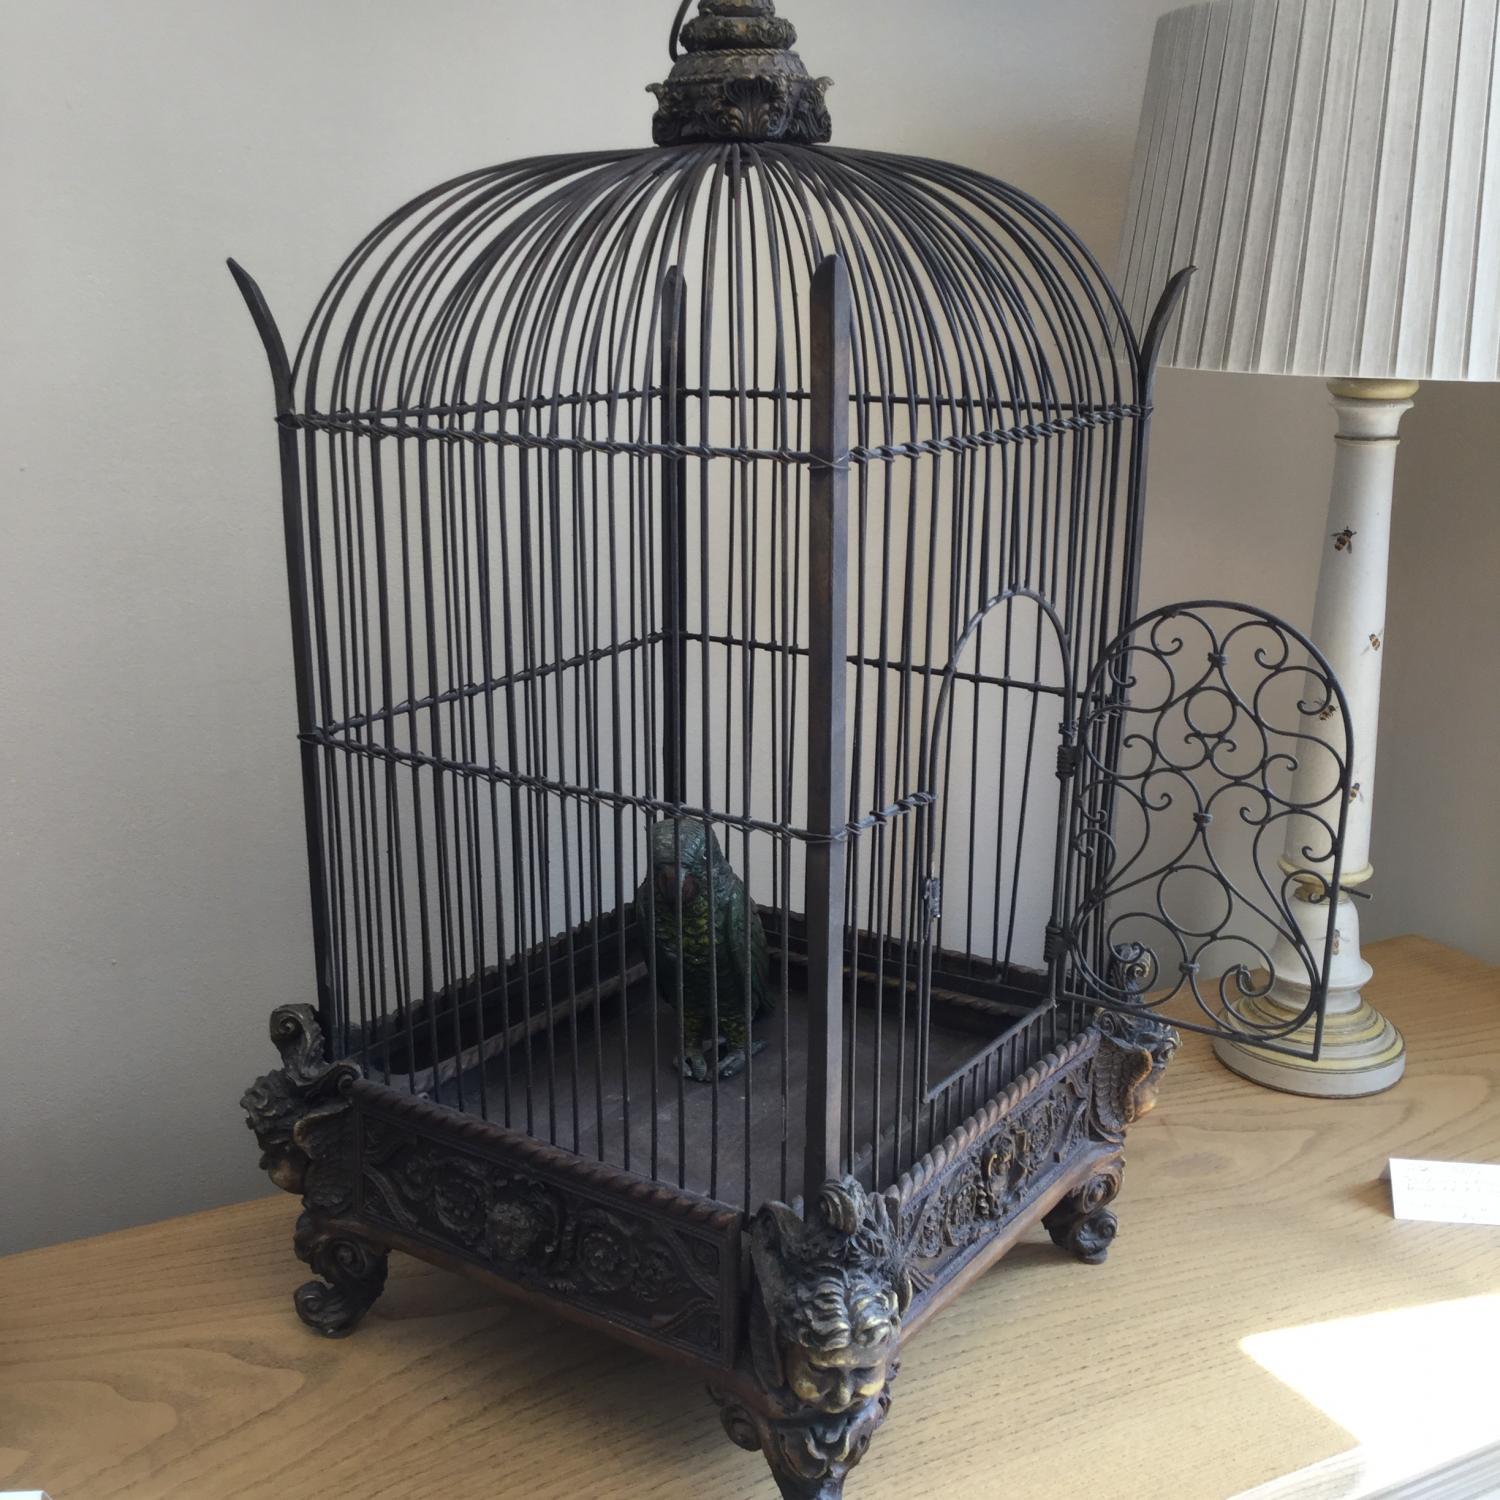 Parrot cage